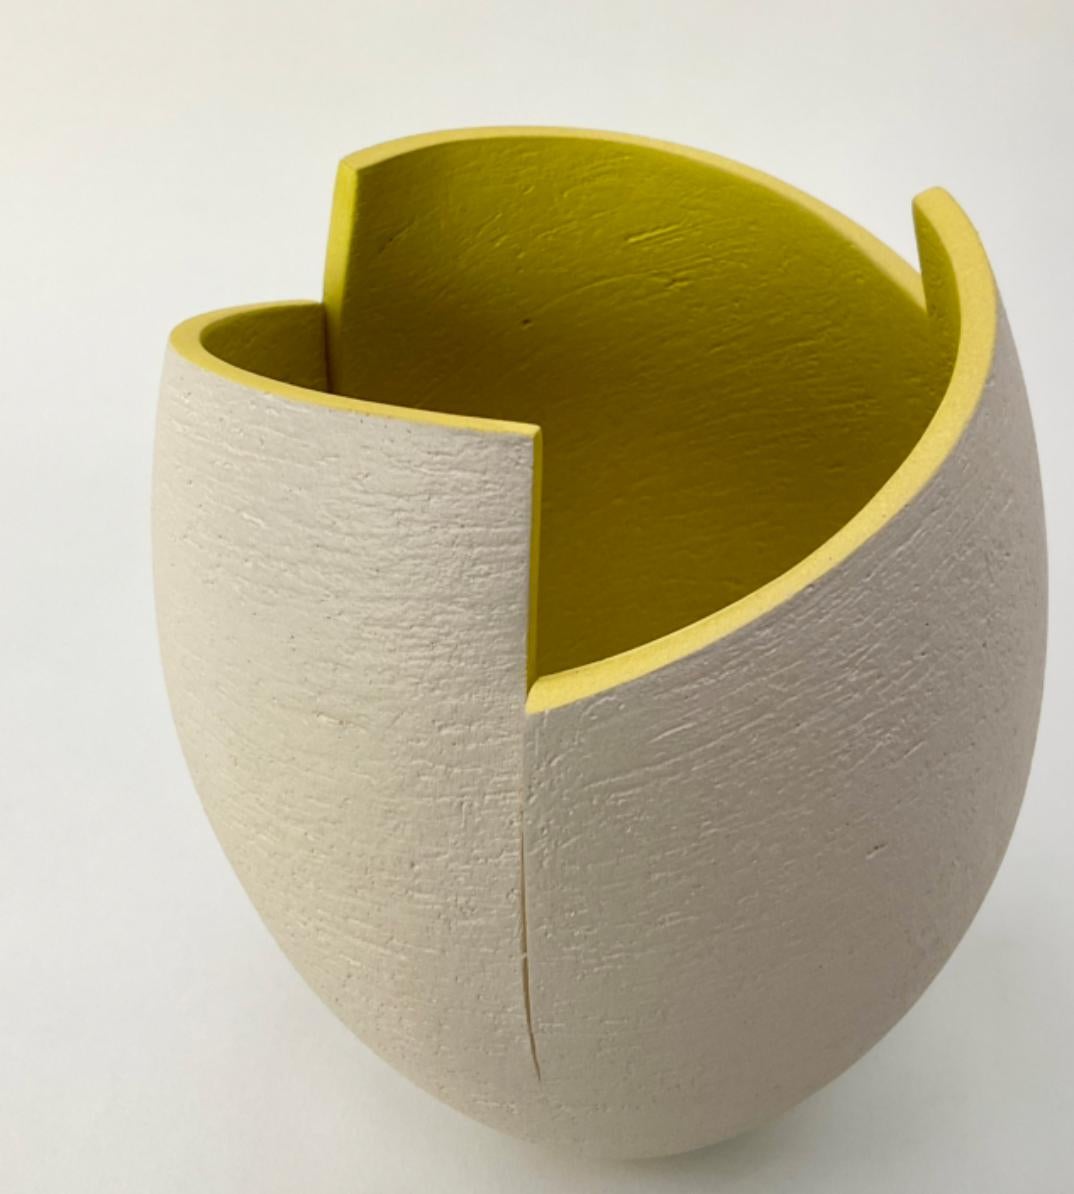 Grey cut and altered vessel with chartreuse interior - Sculpture by Ashraf Hanna